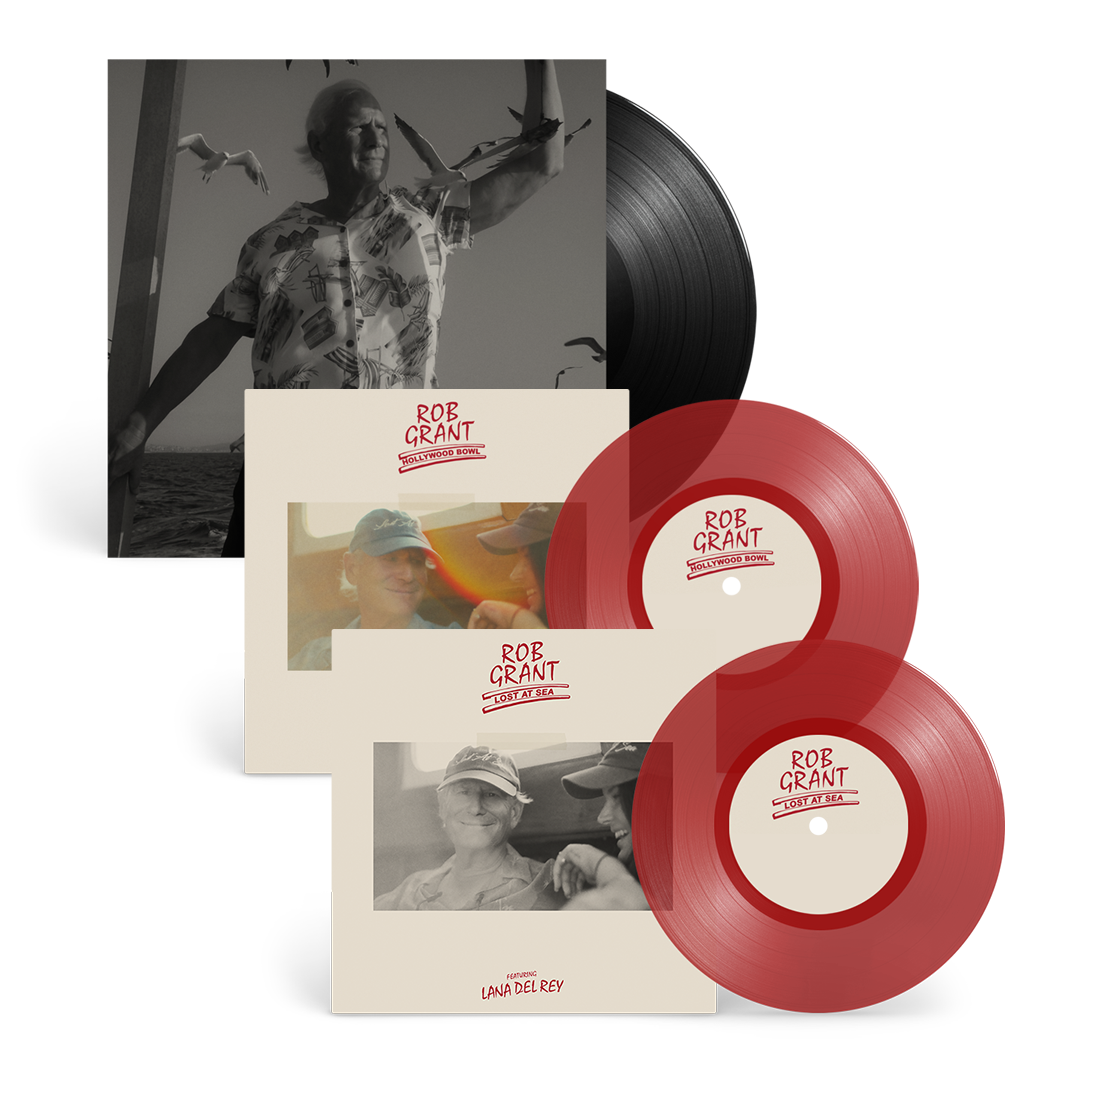 Limited Edition Lost At Sea LP & Exclusive 7”s feat. Lana Del Rey